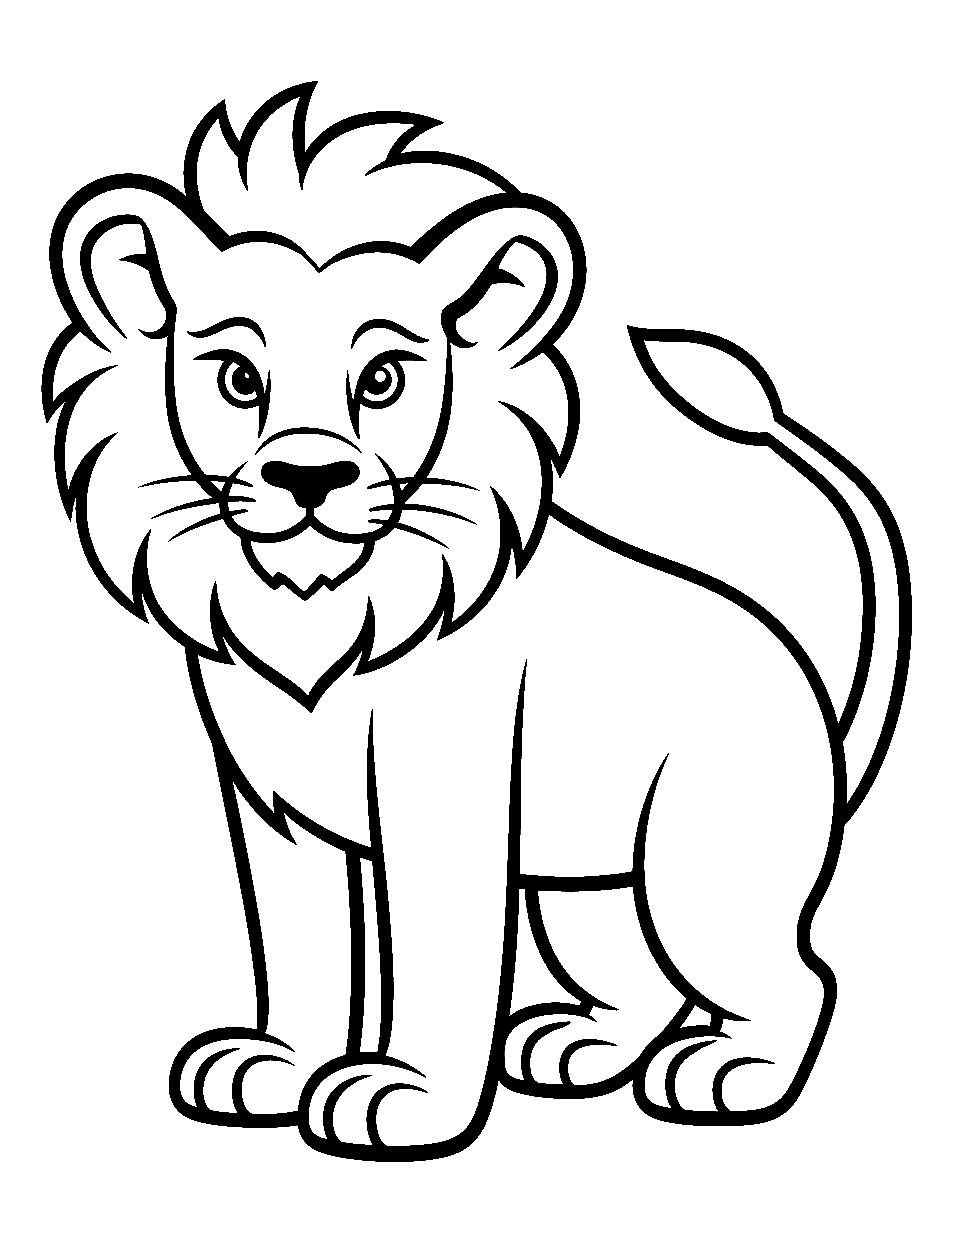 Easy Lion Outline Coloring Page - A simple outline of a lion, perfect for beginners.